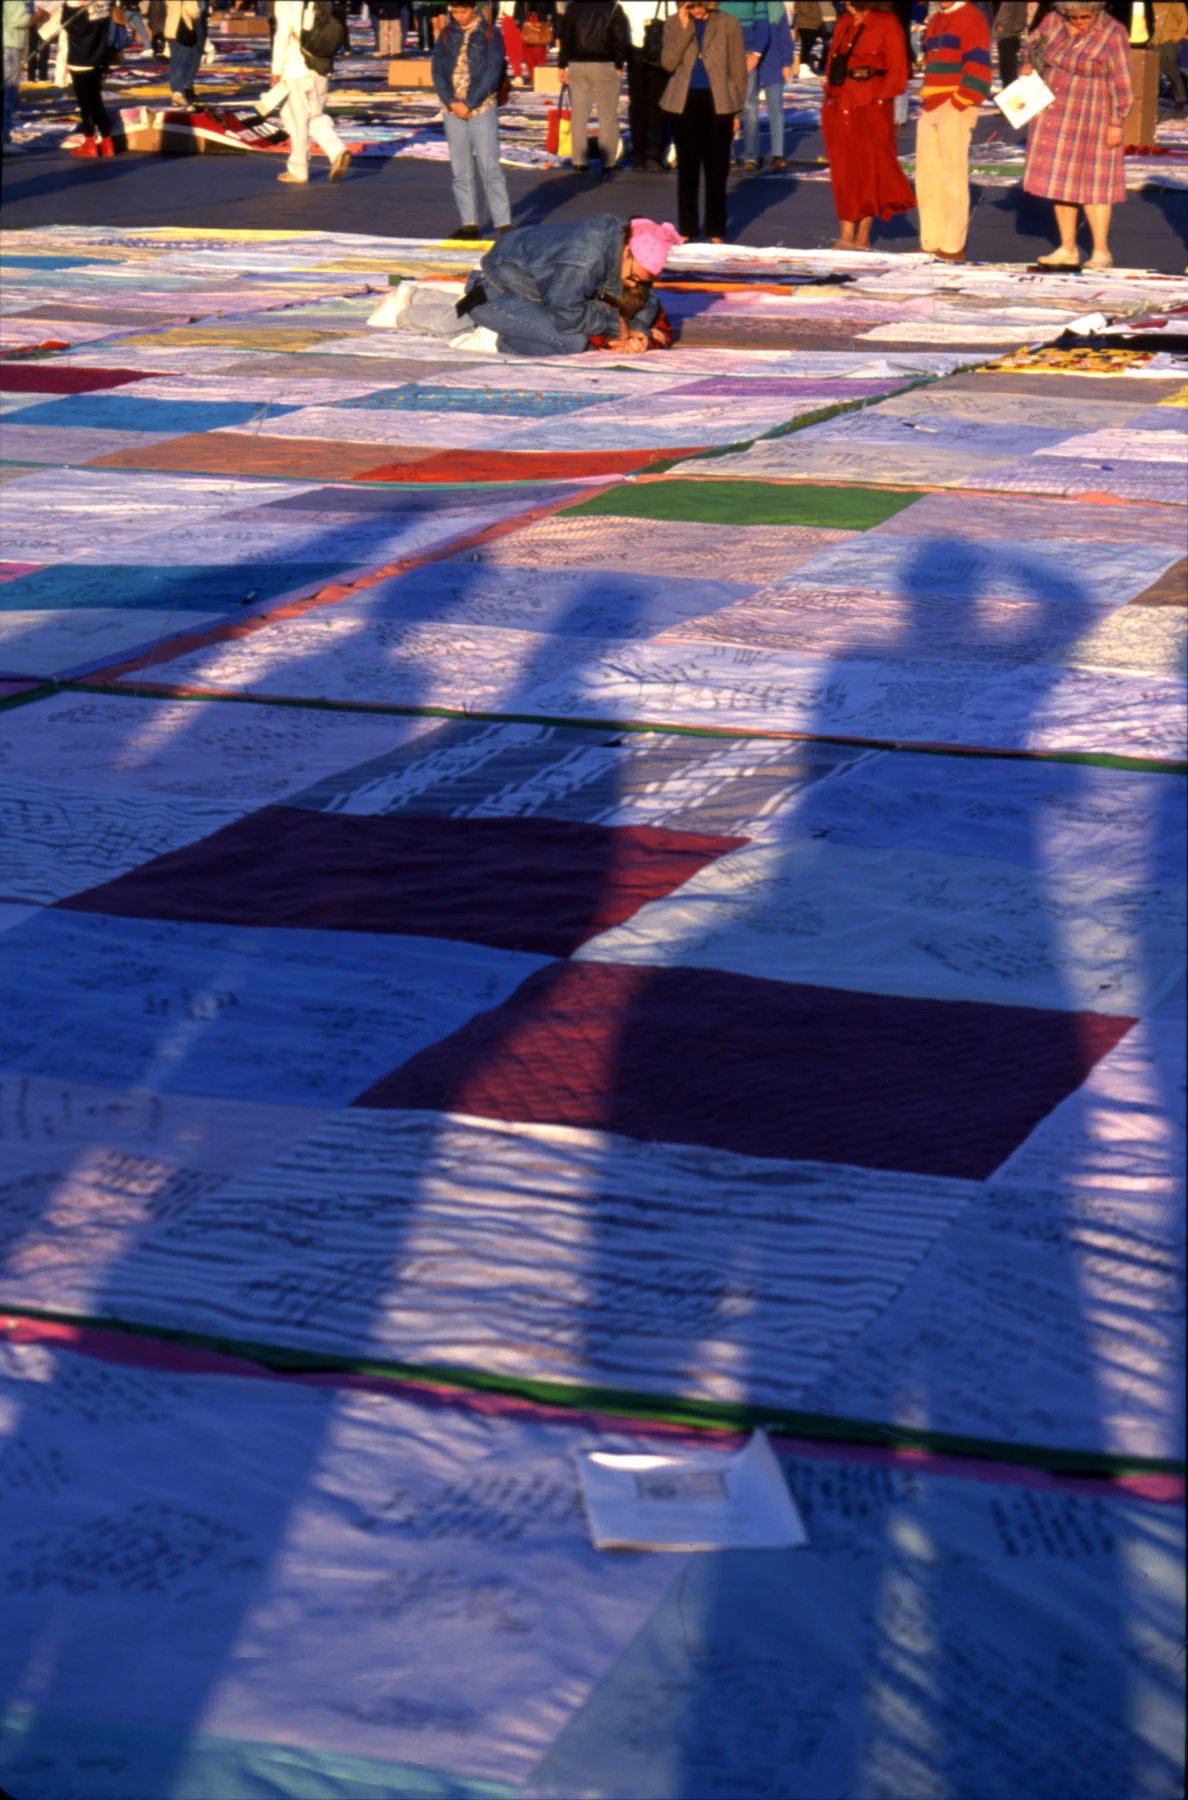 A color photograph of quilts laid out on the grass in Washington, D.C. Behind the quilts stand groups of people, visible from the waist down. Blue shadows of people standing behind the camera are cast across the quilts.